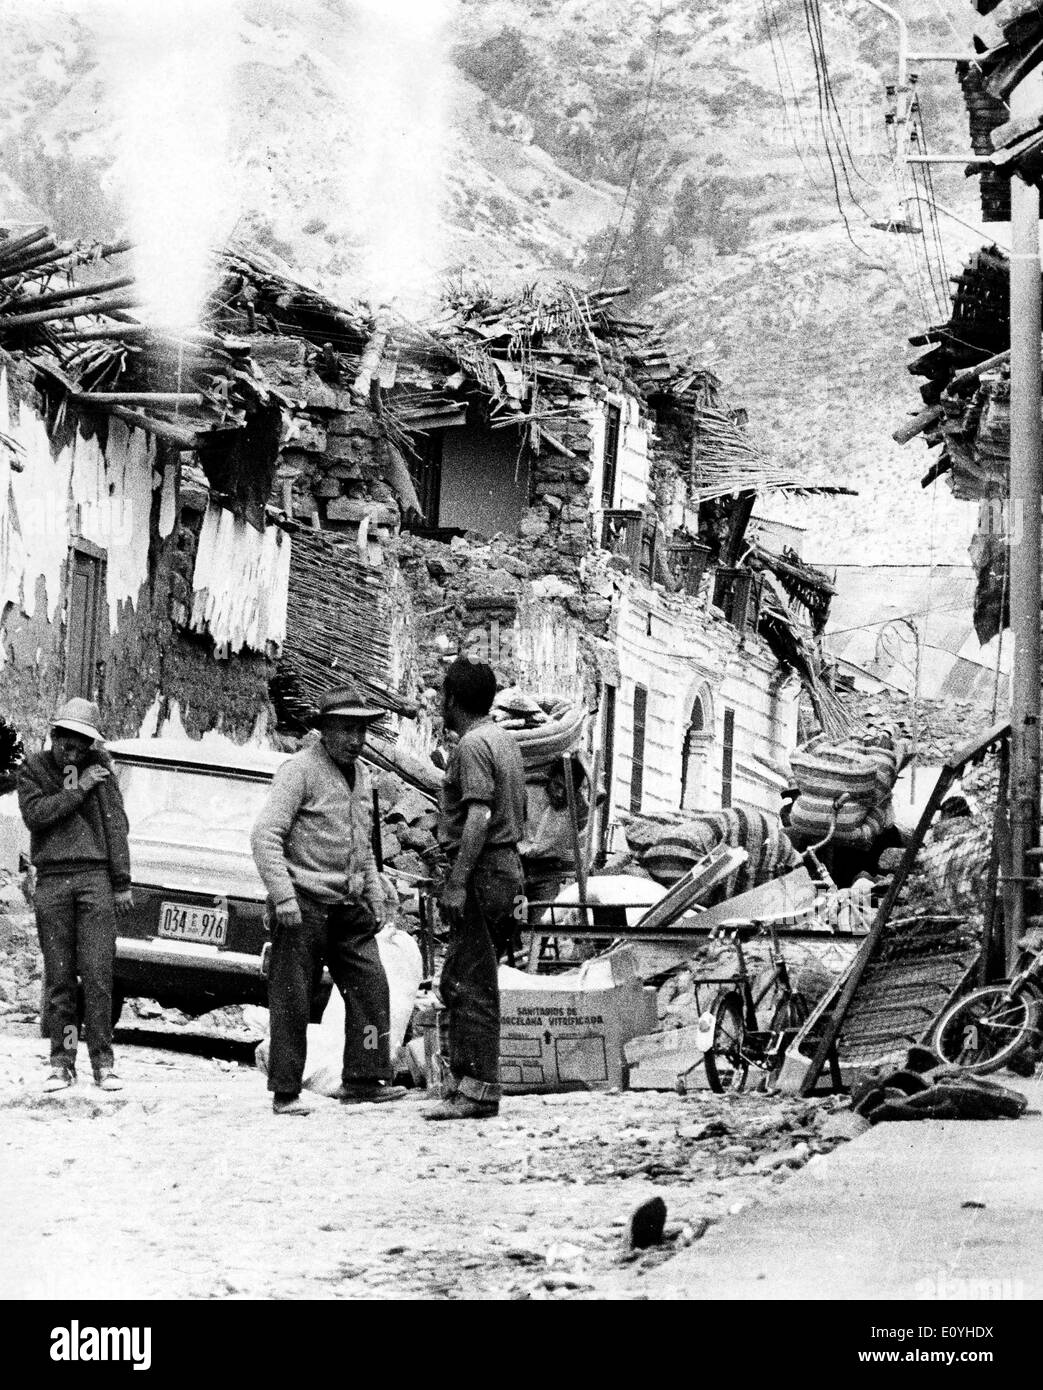 May 31, 1970; Huaraz, PERU; Images of the devastation caused by the 1970 earthquake in Peru, when 70,000 people were killed in ensuing mudslides in Huaraz in the central Andes. It registered 7.8 on the Ritcher scale. Damage was estimated at approximately billion, and about 1 million people were left homeless. Stock Photo